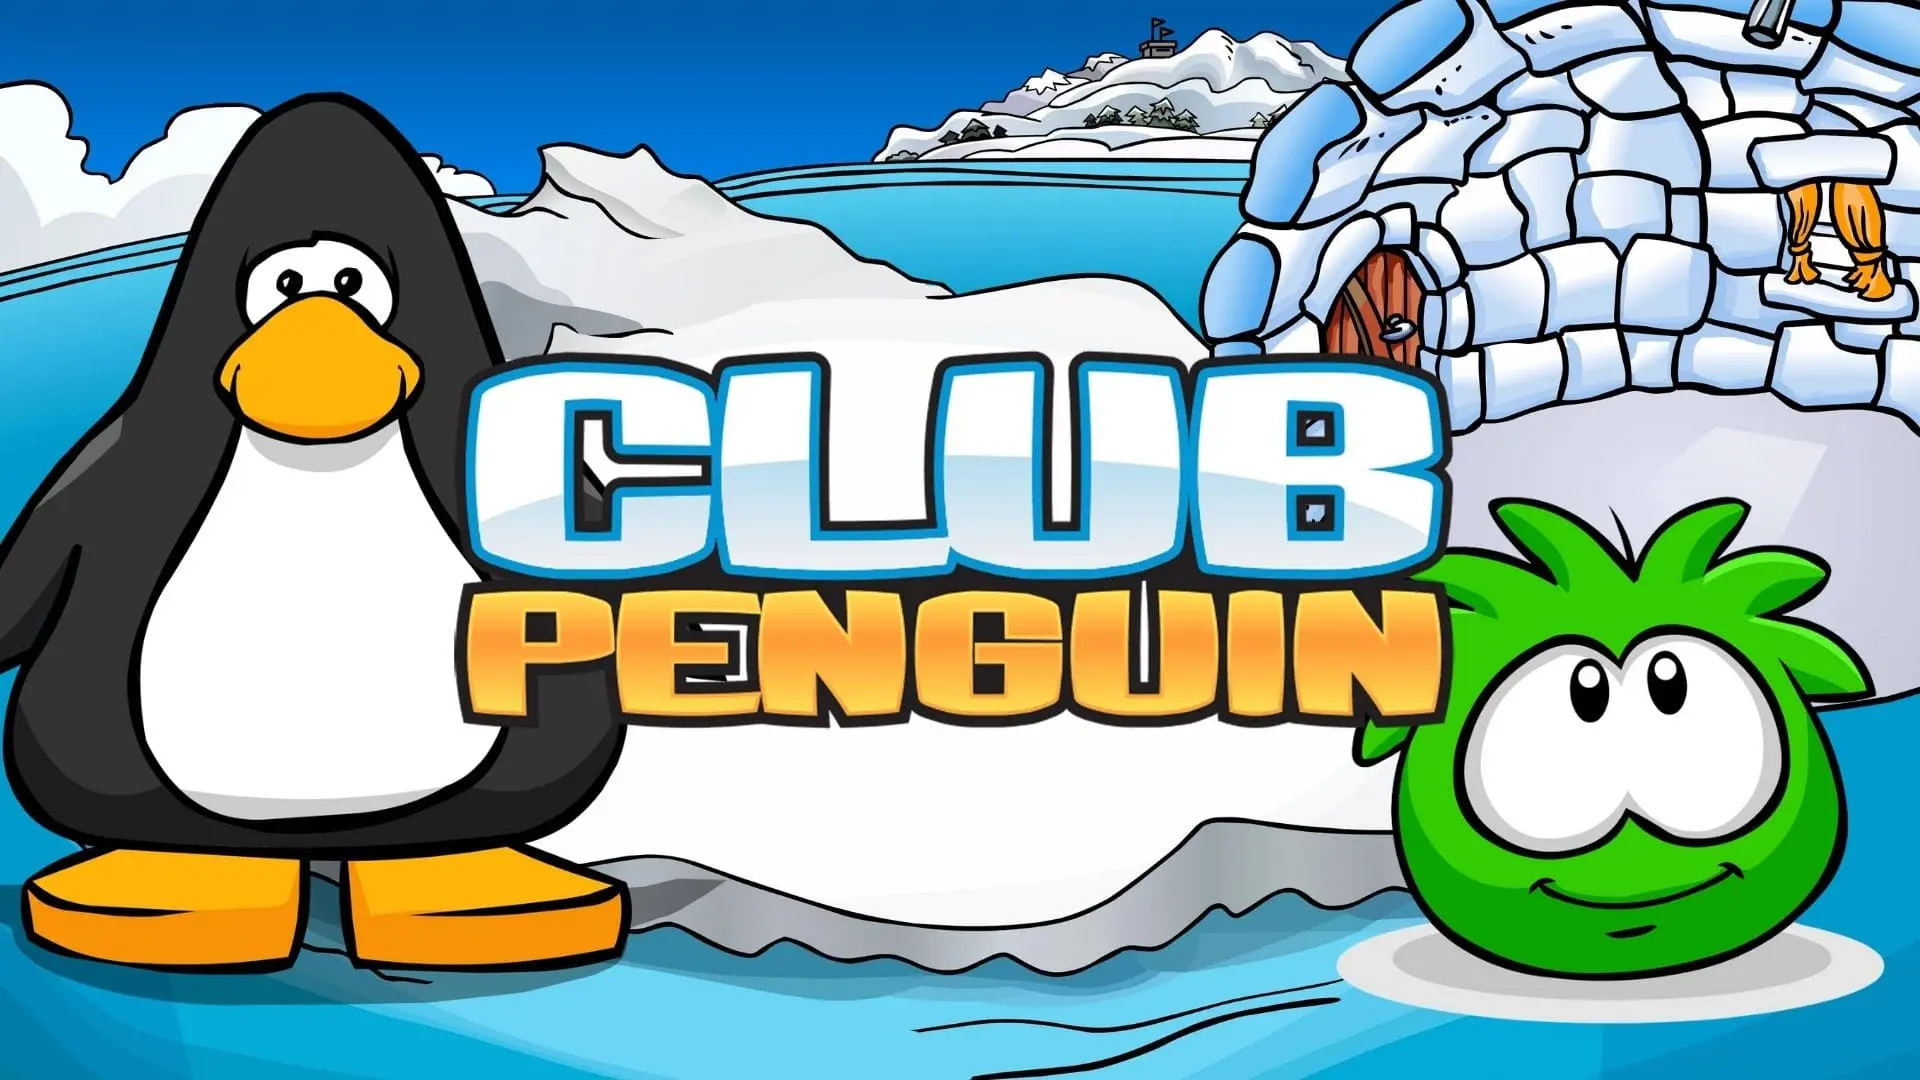 Live at the Penguin Club